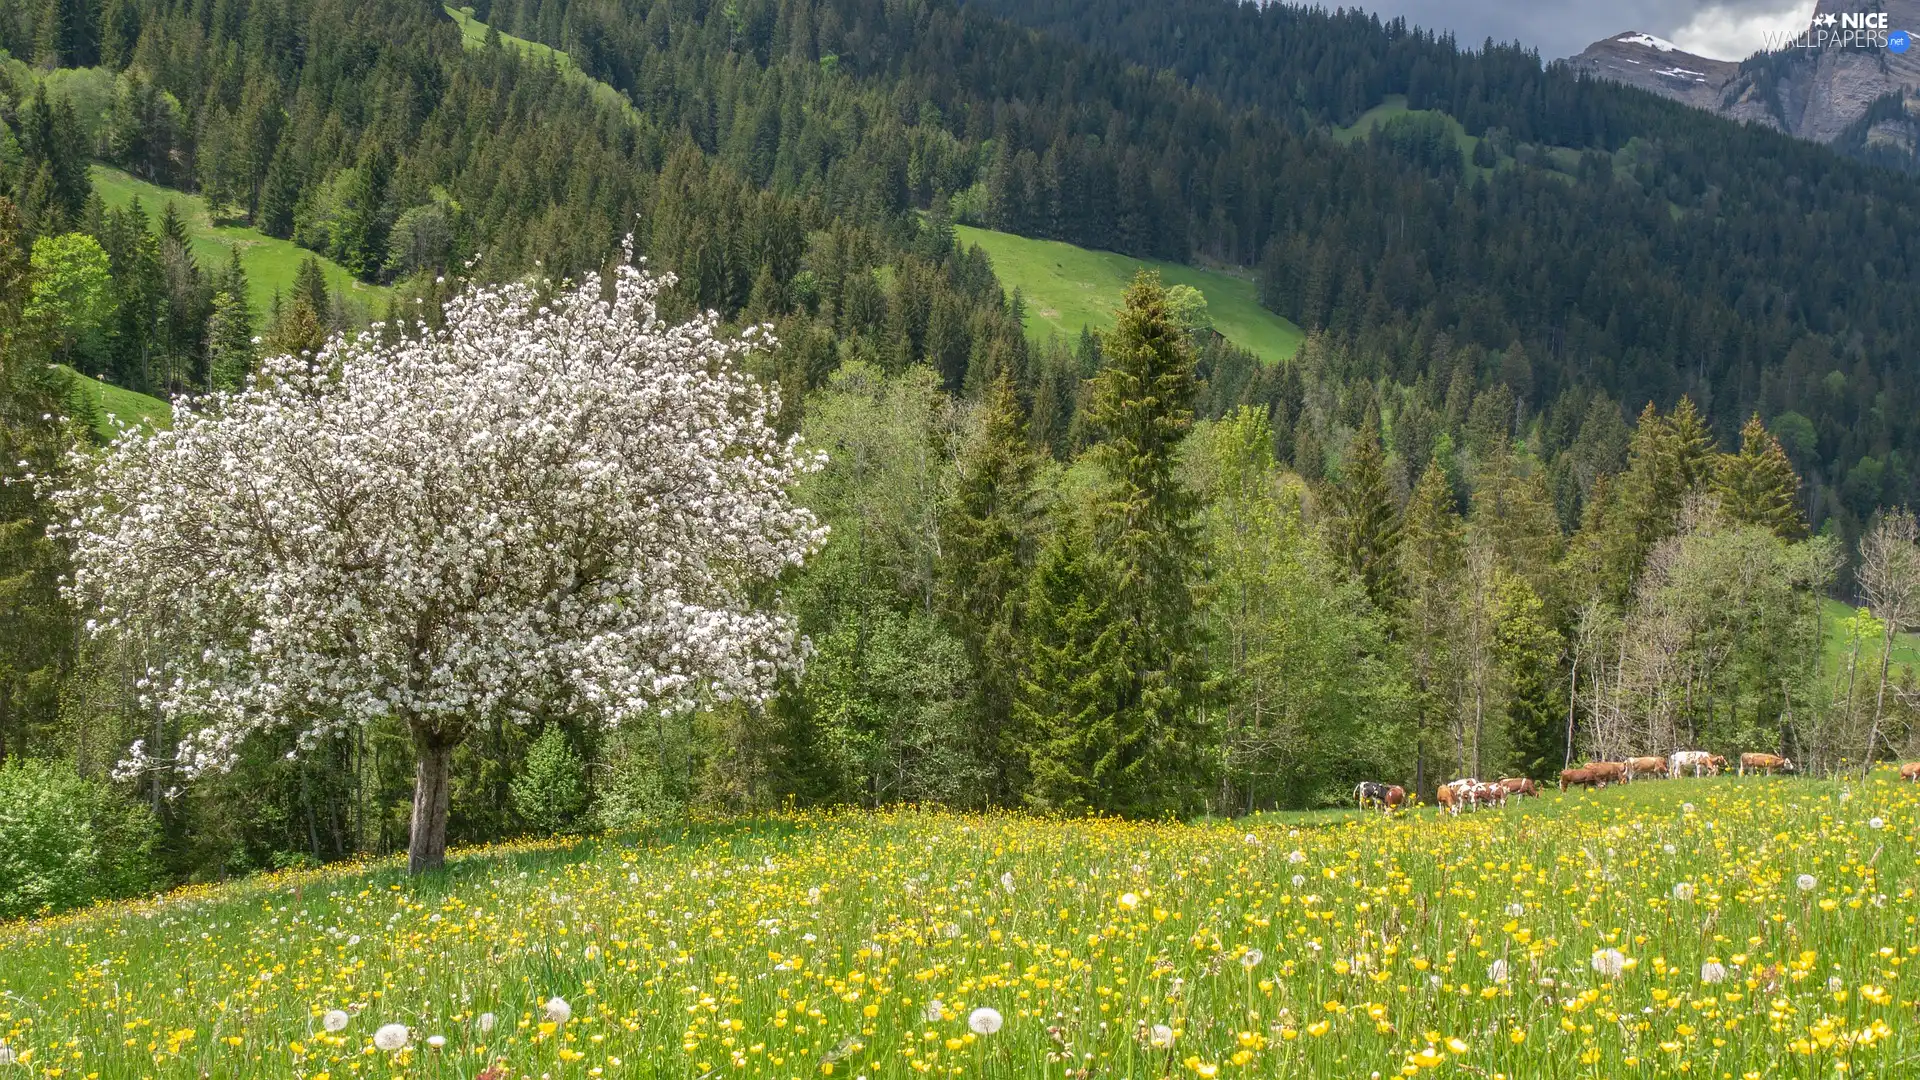 Flowers, flourishing, Mountains, trees, forest, Meadow, Spring, Cows